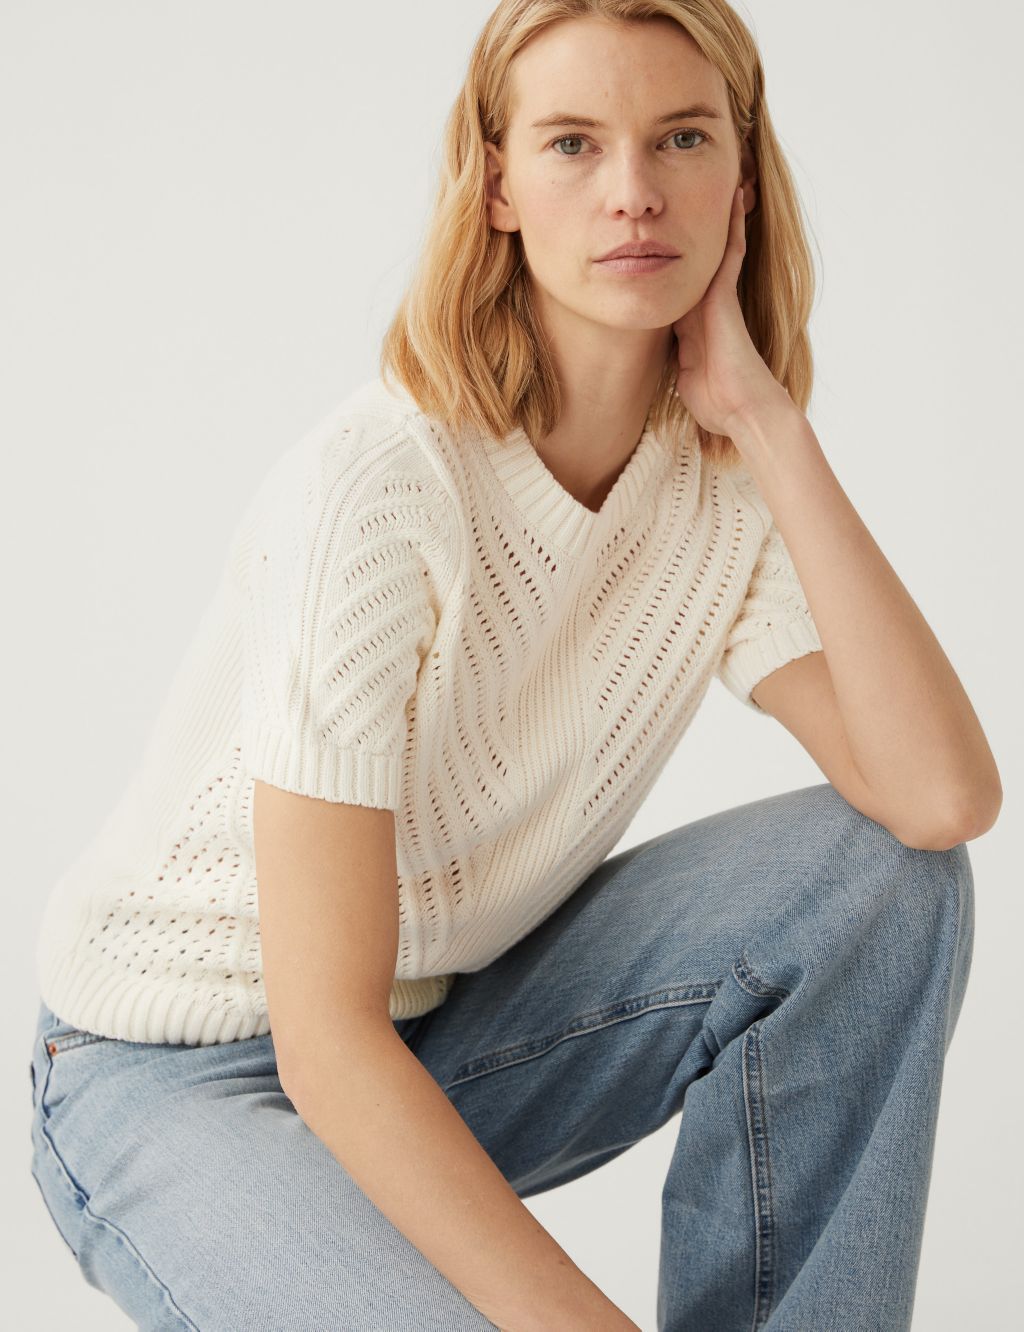 Cotton Rich Textured Crew Neck Knitted Top image 1